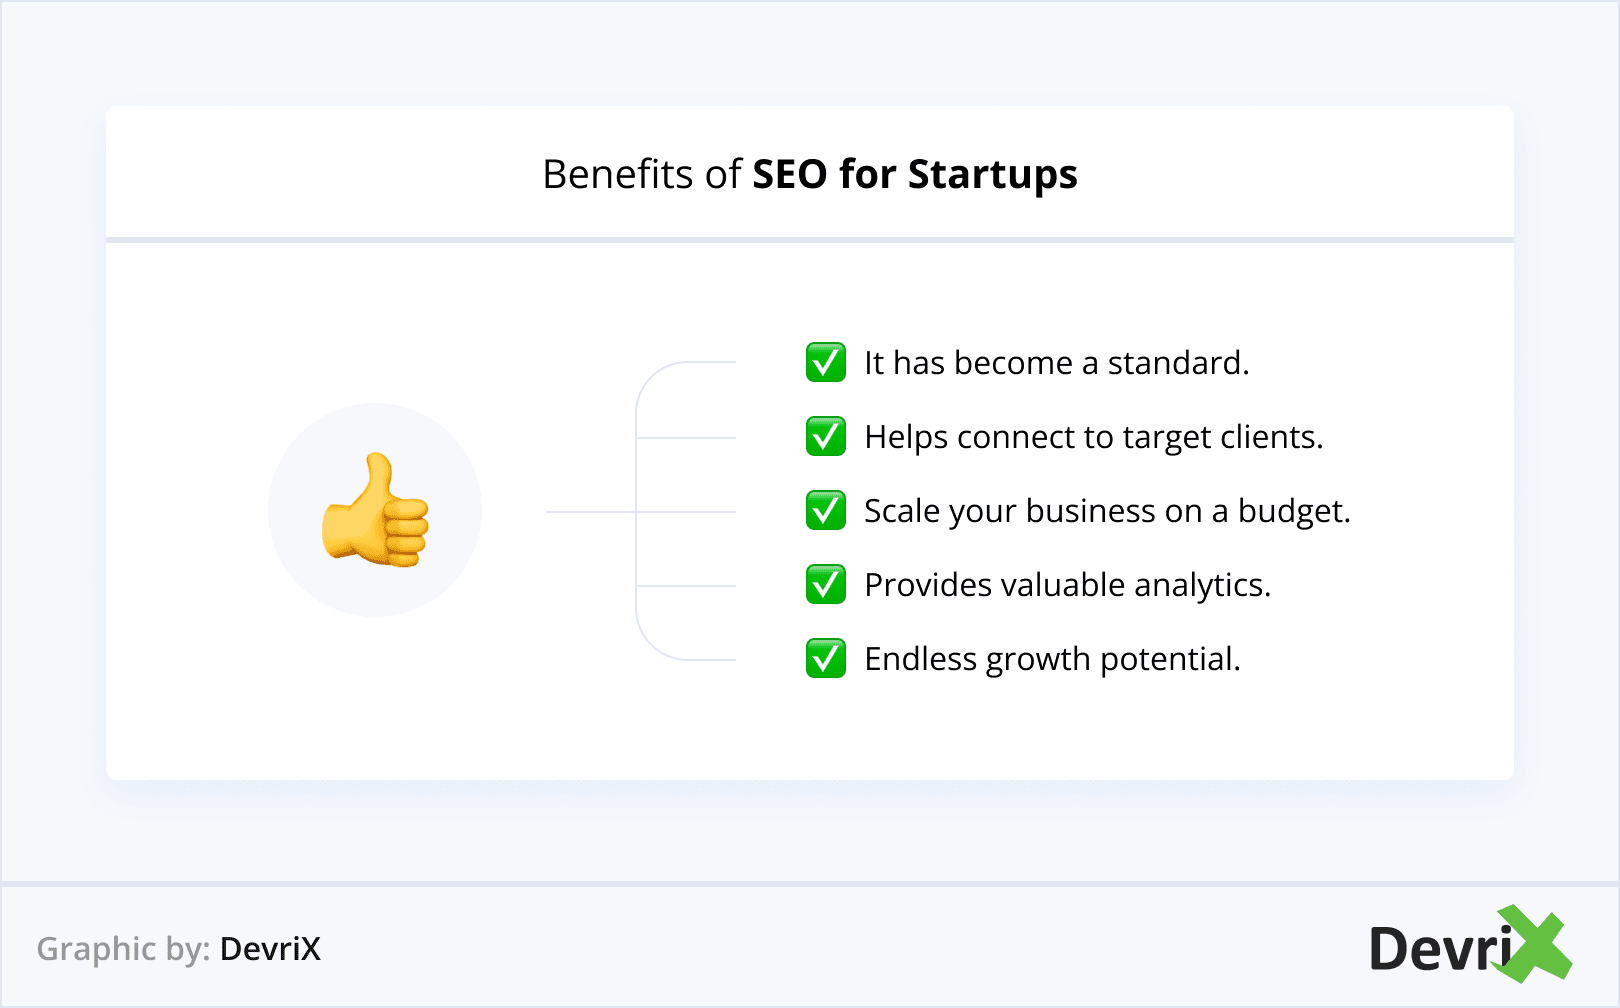 Benefits of SEO for Startups